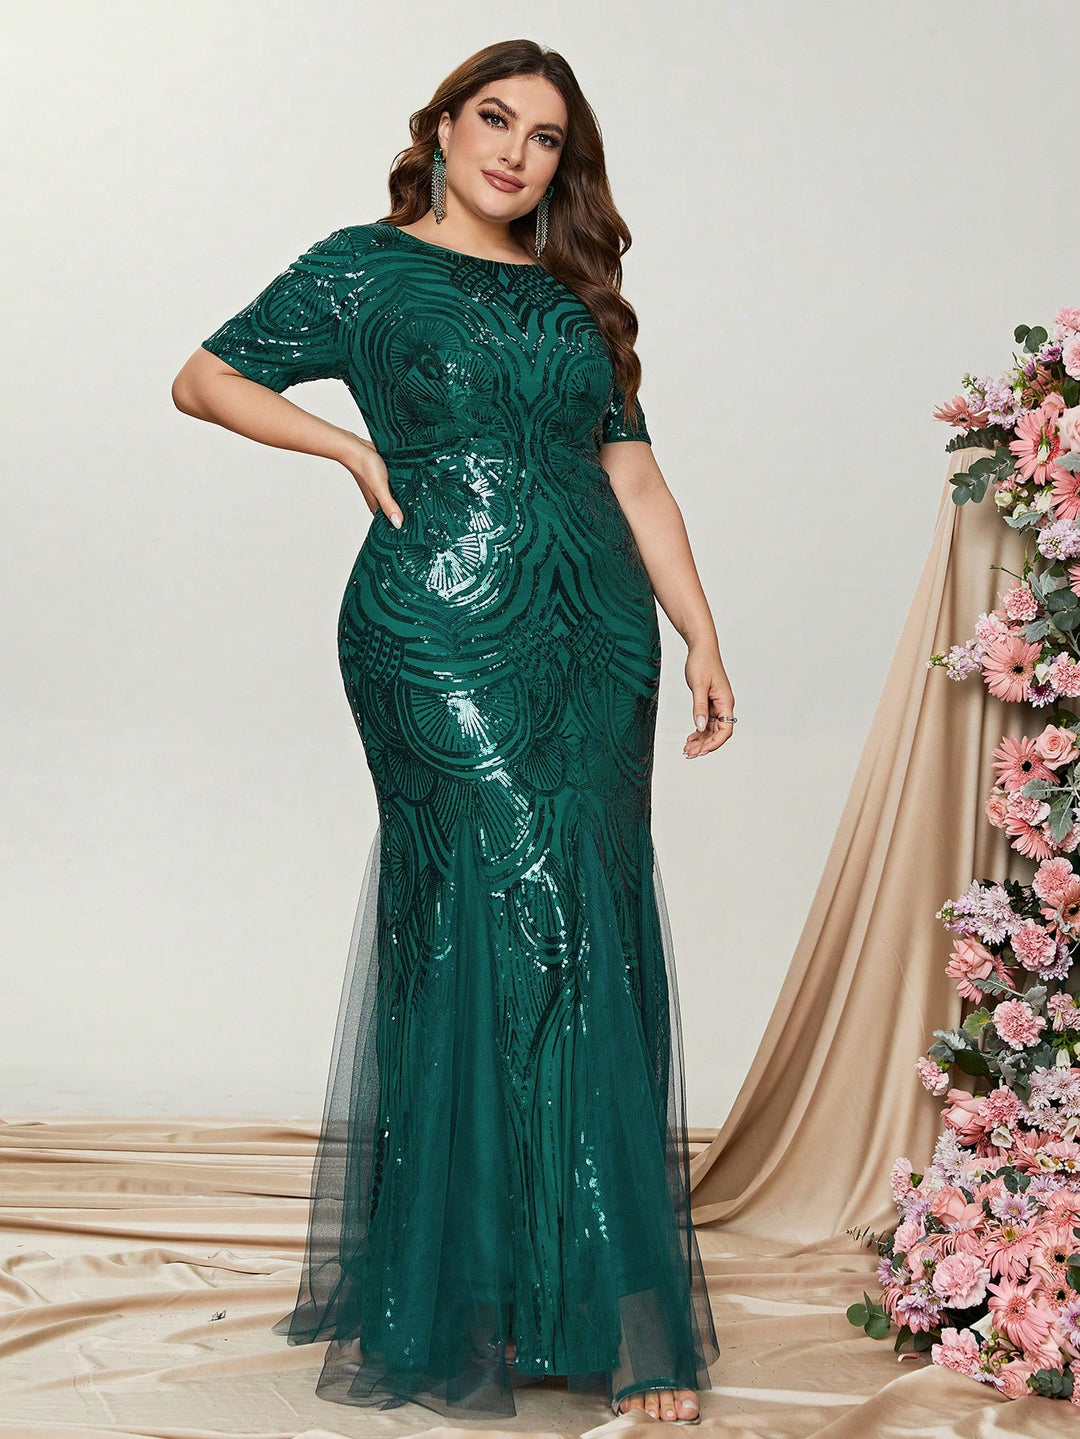 Plus Size Formal Dress Round Neck Short Sleeve Mermaid Evening Gown